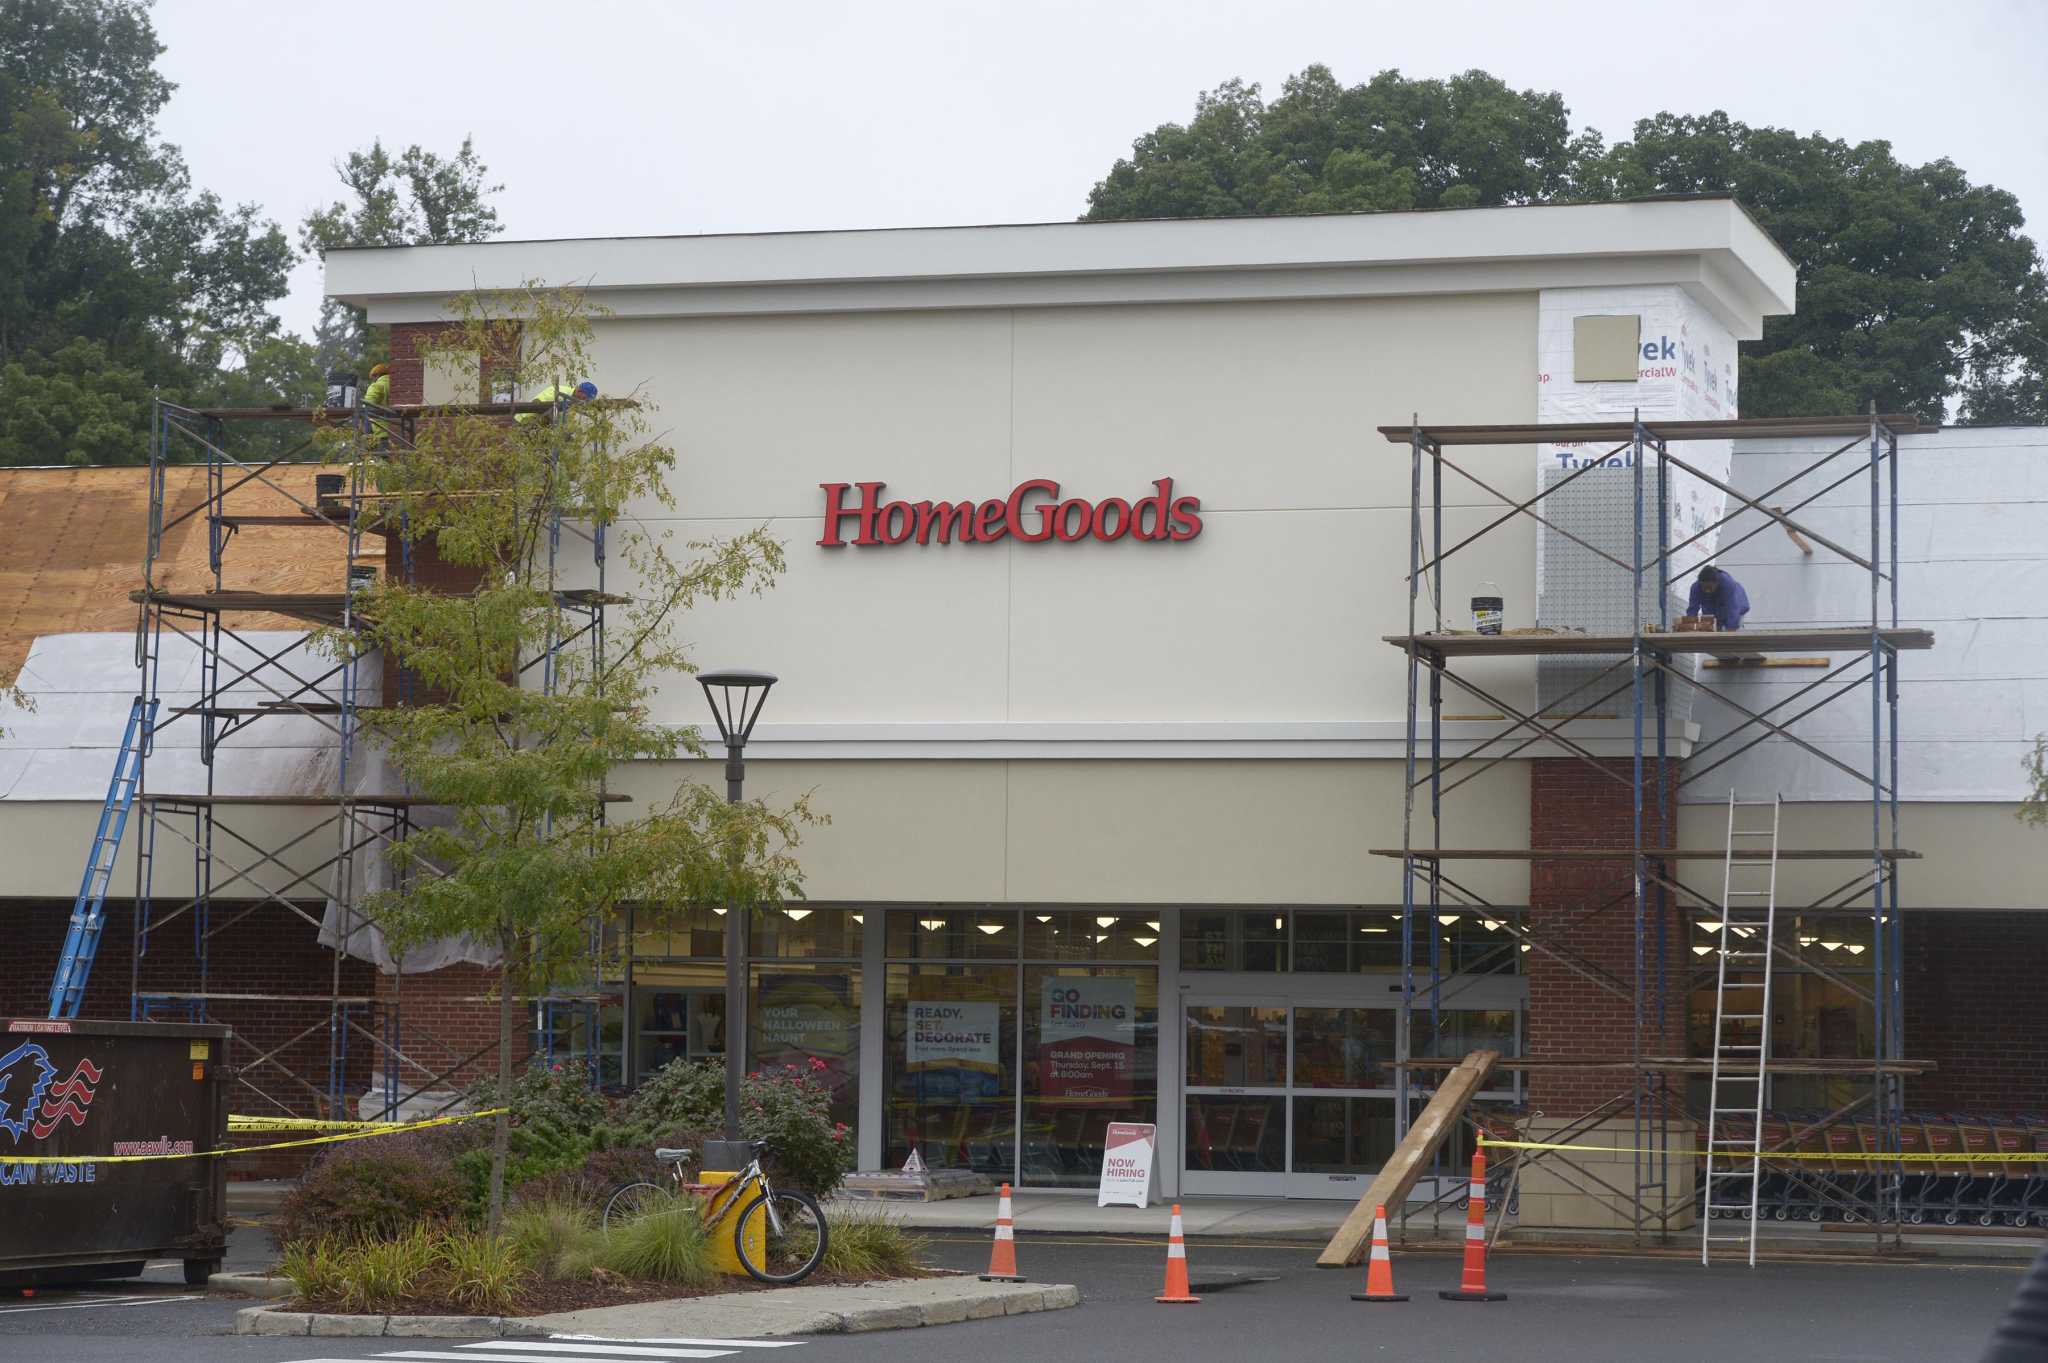 HomeGoods may be coming to Shelton image pic image